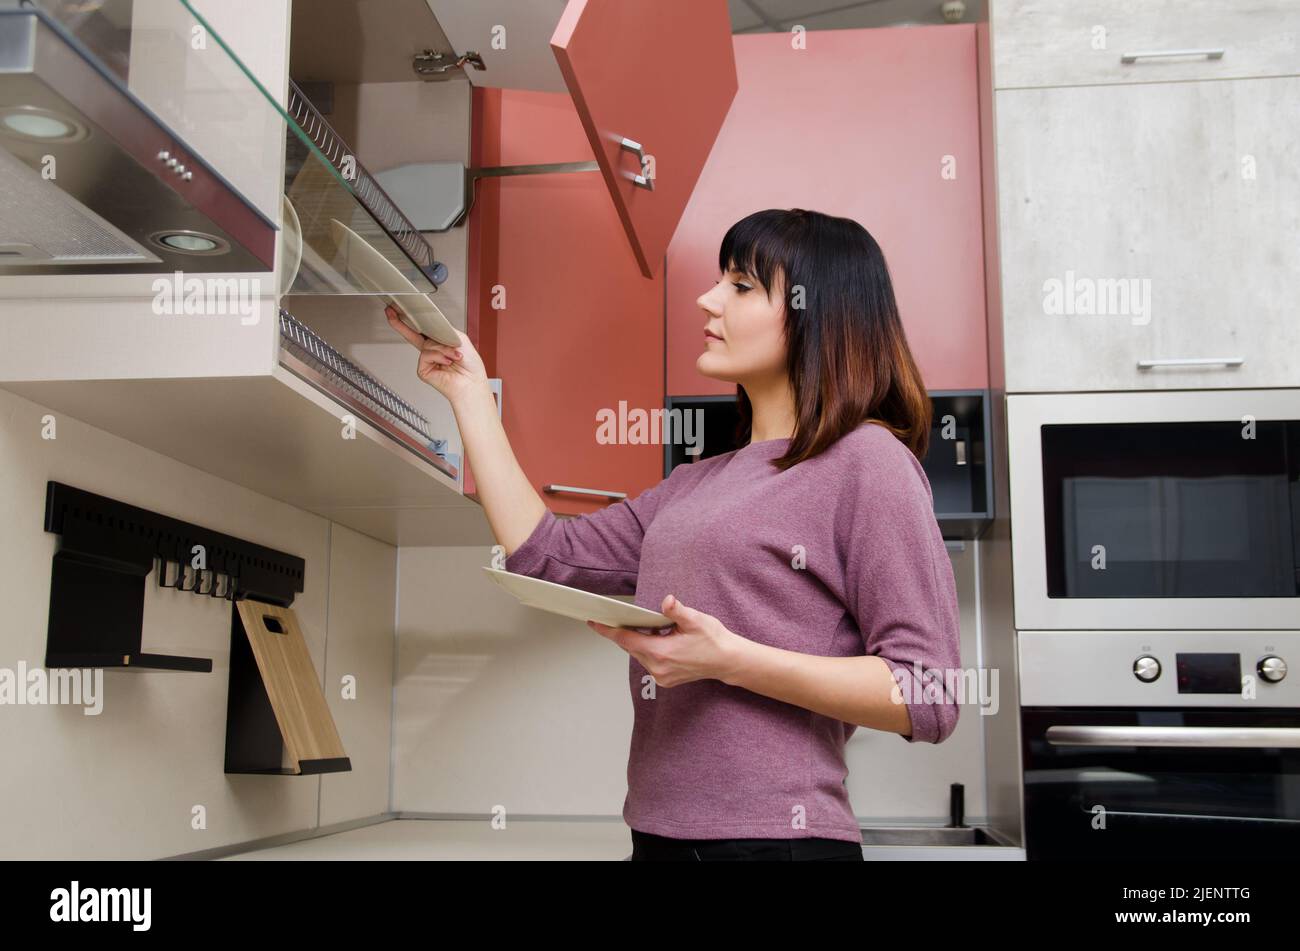 A young woman takes out a plate from the dish dryer in the kitchen Stock Photo